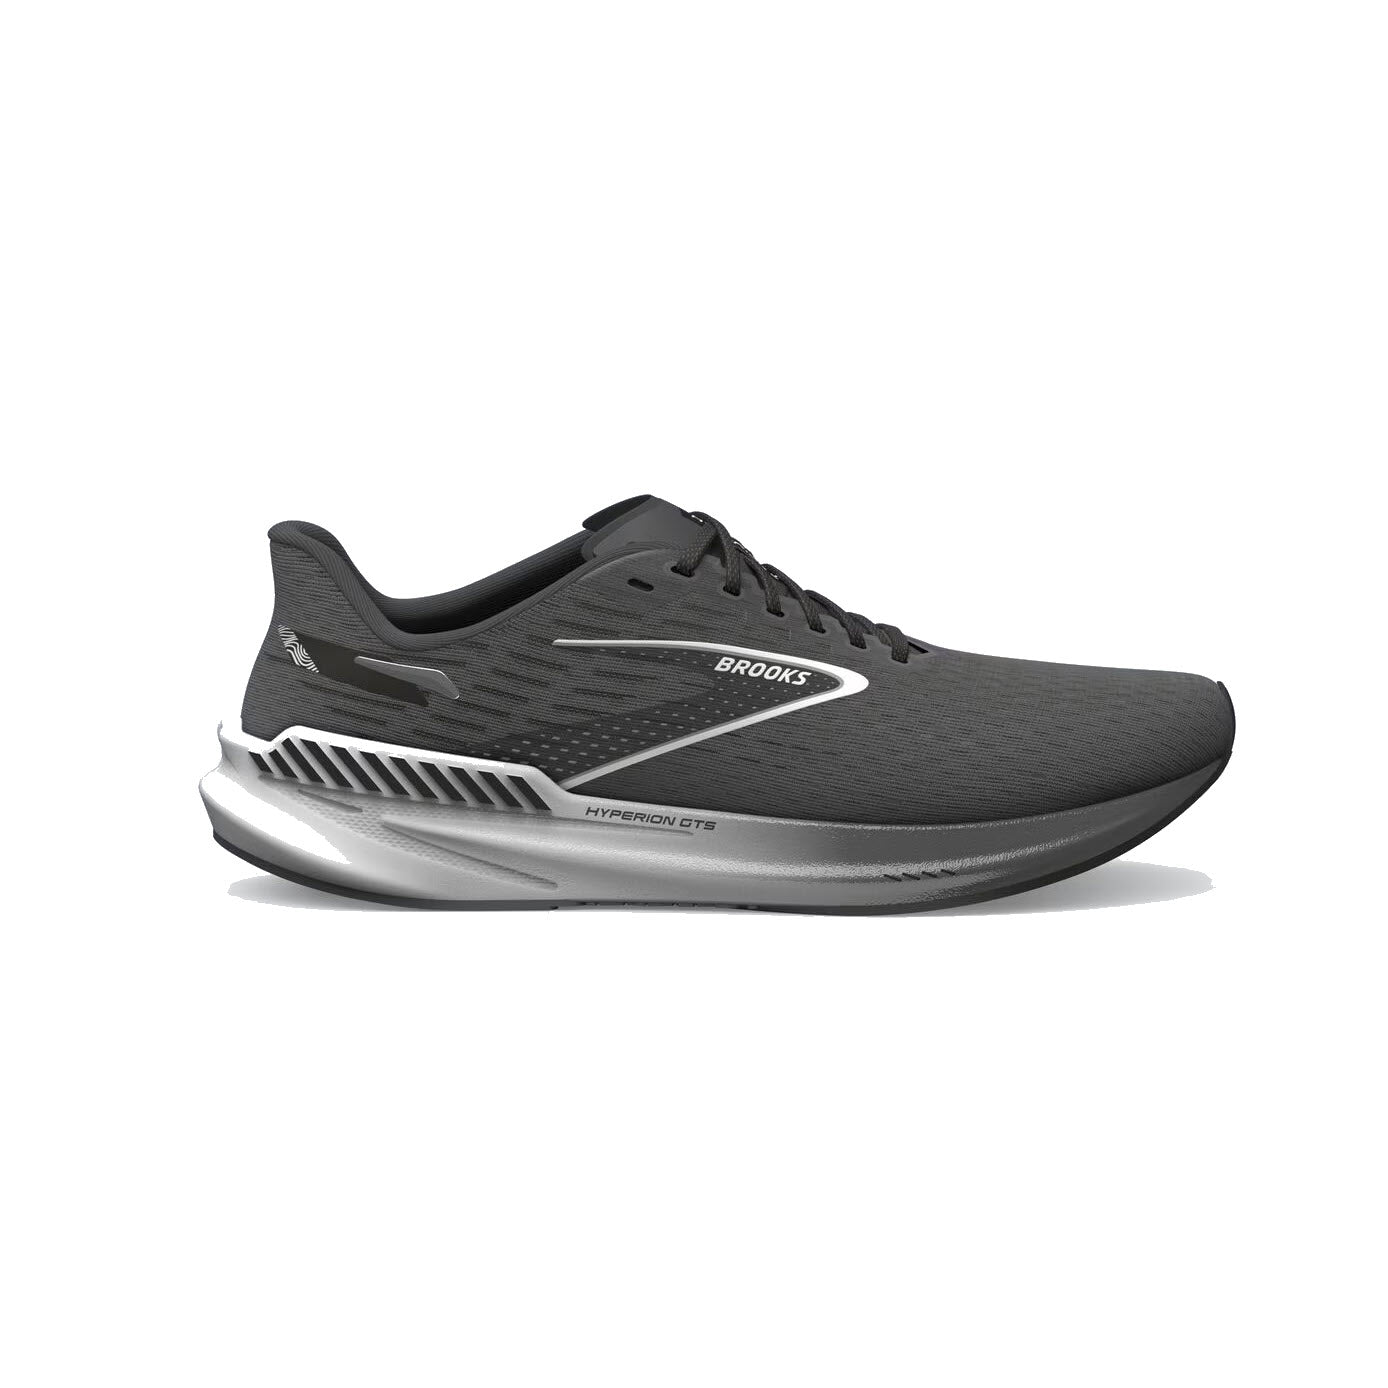 A single Brooks Hyperion GTS Gunmetal/Black/White running shoe, displayed in a side view on a white background.